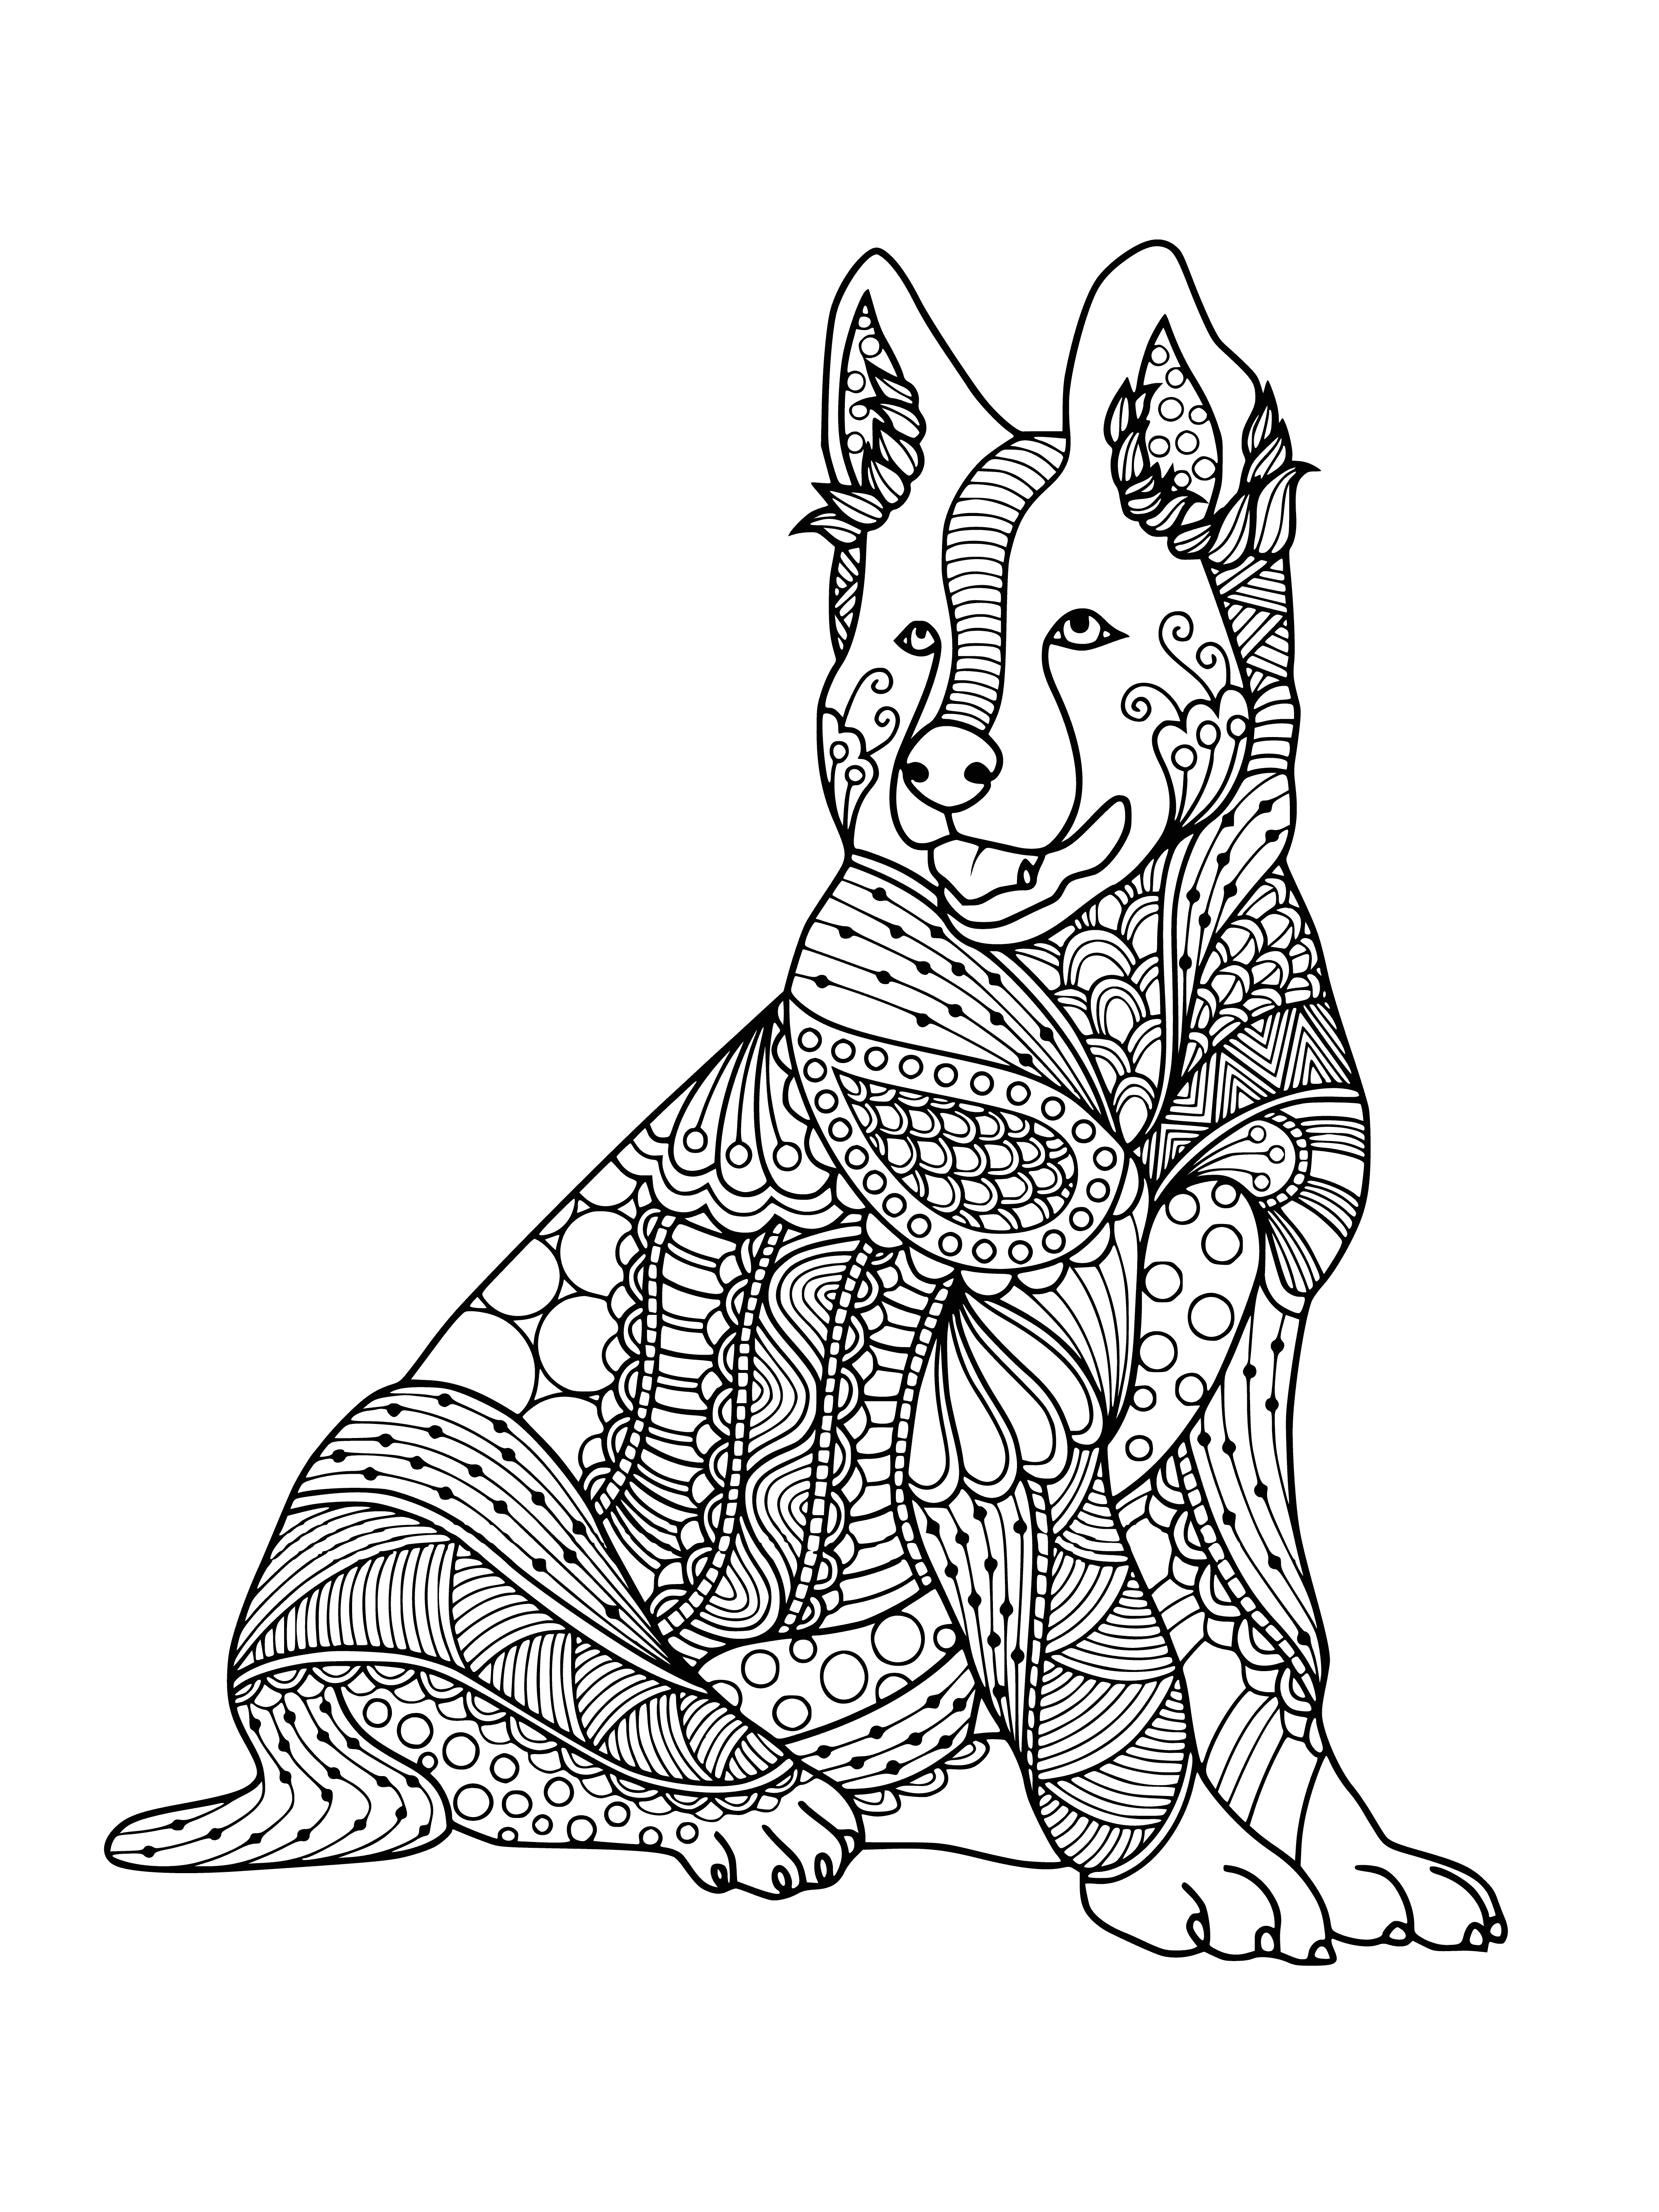 Camomile coloring page